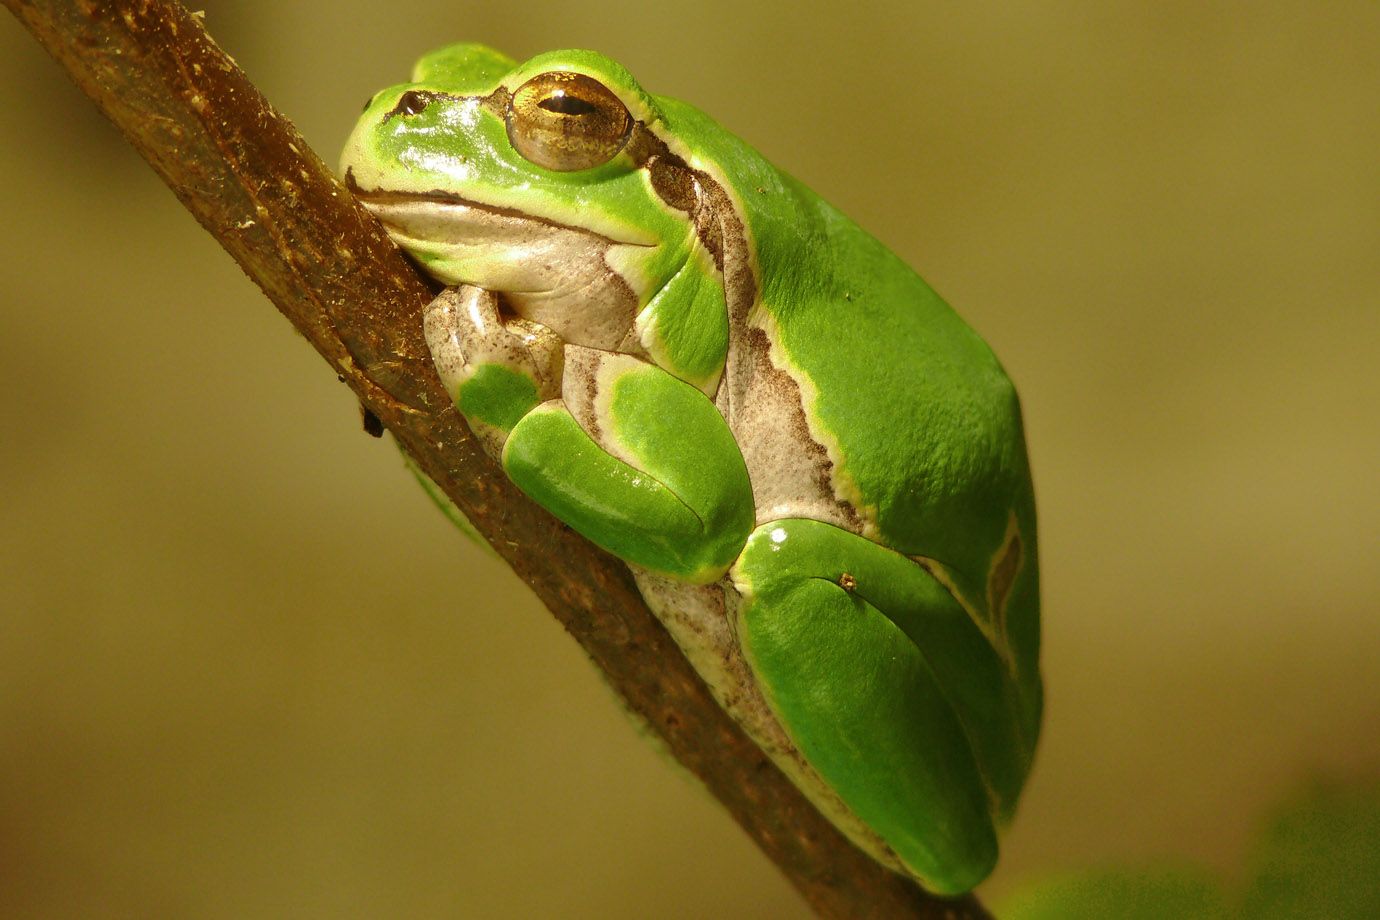 The mini European Tree Frog knows to make itself visibly at home on the twig.